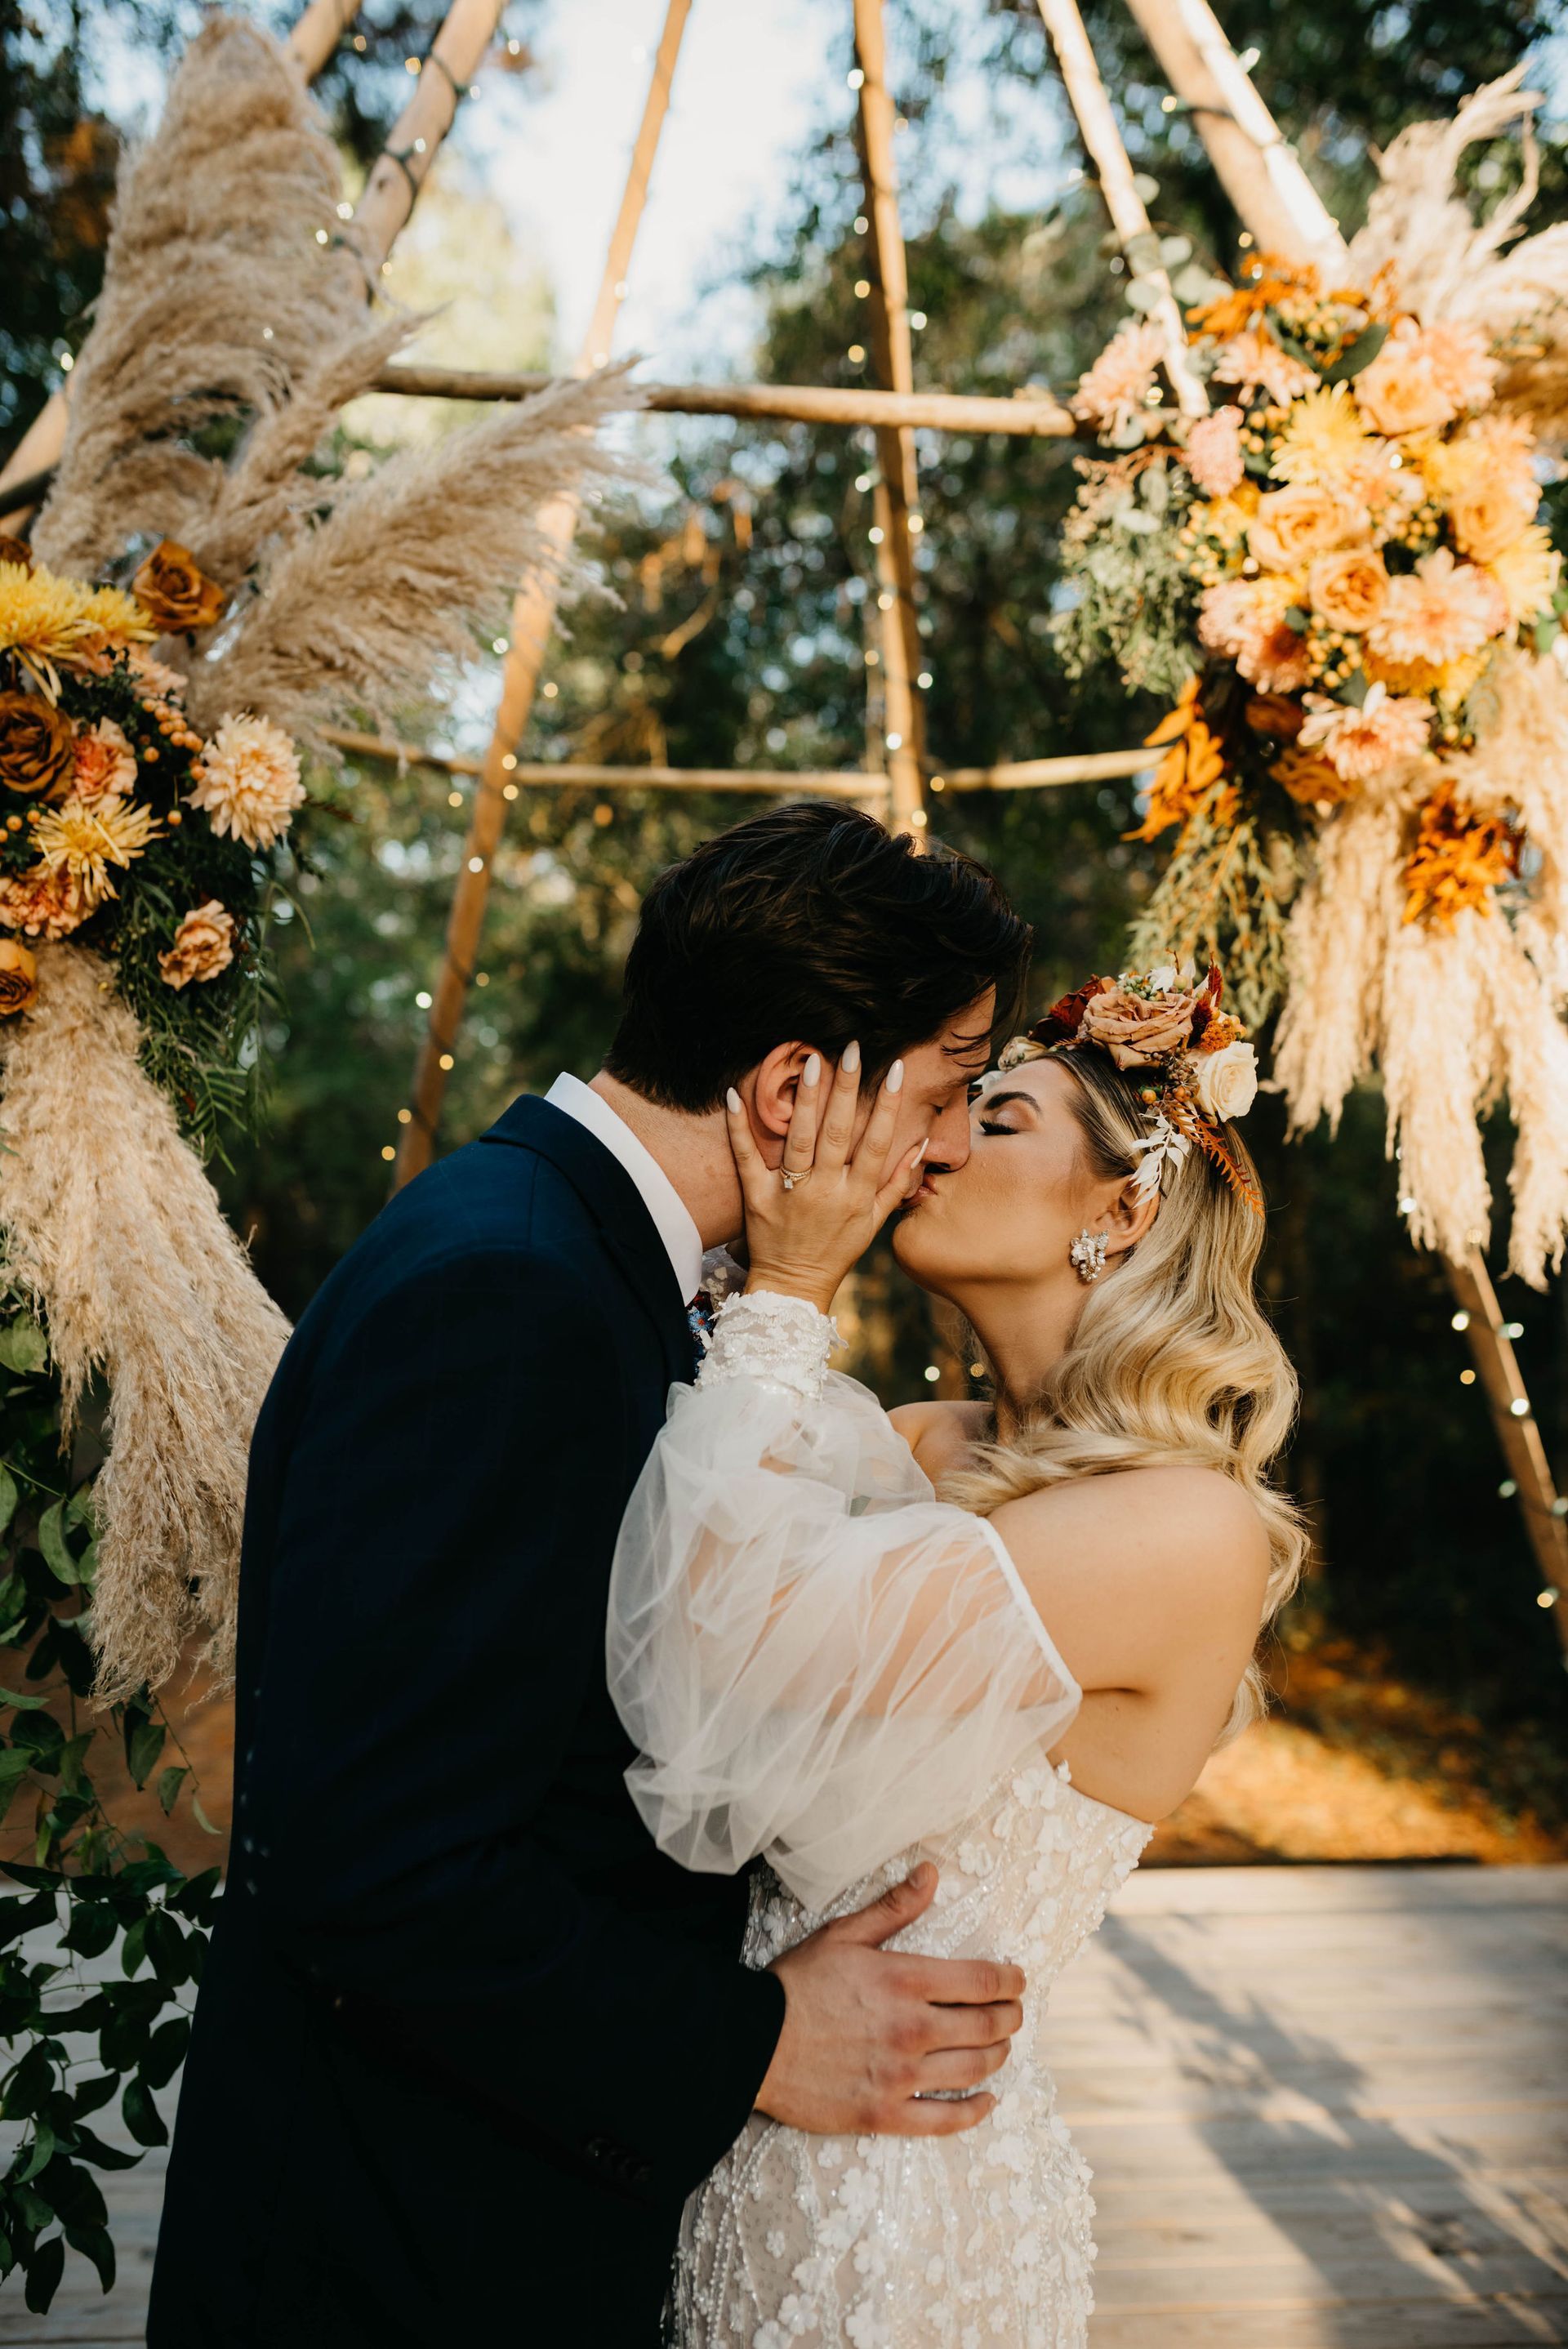 a bride and groom are kissing under a floral arch at their wedding .